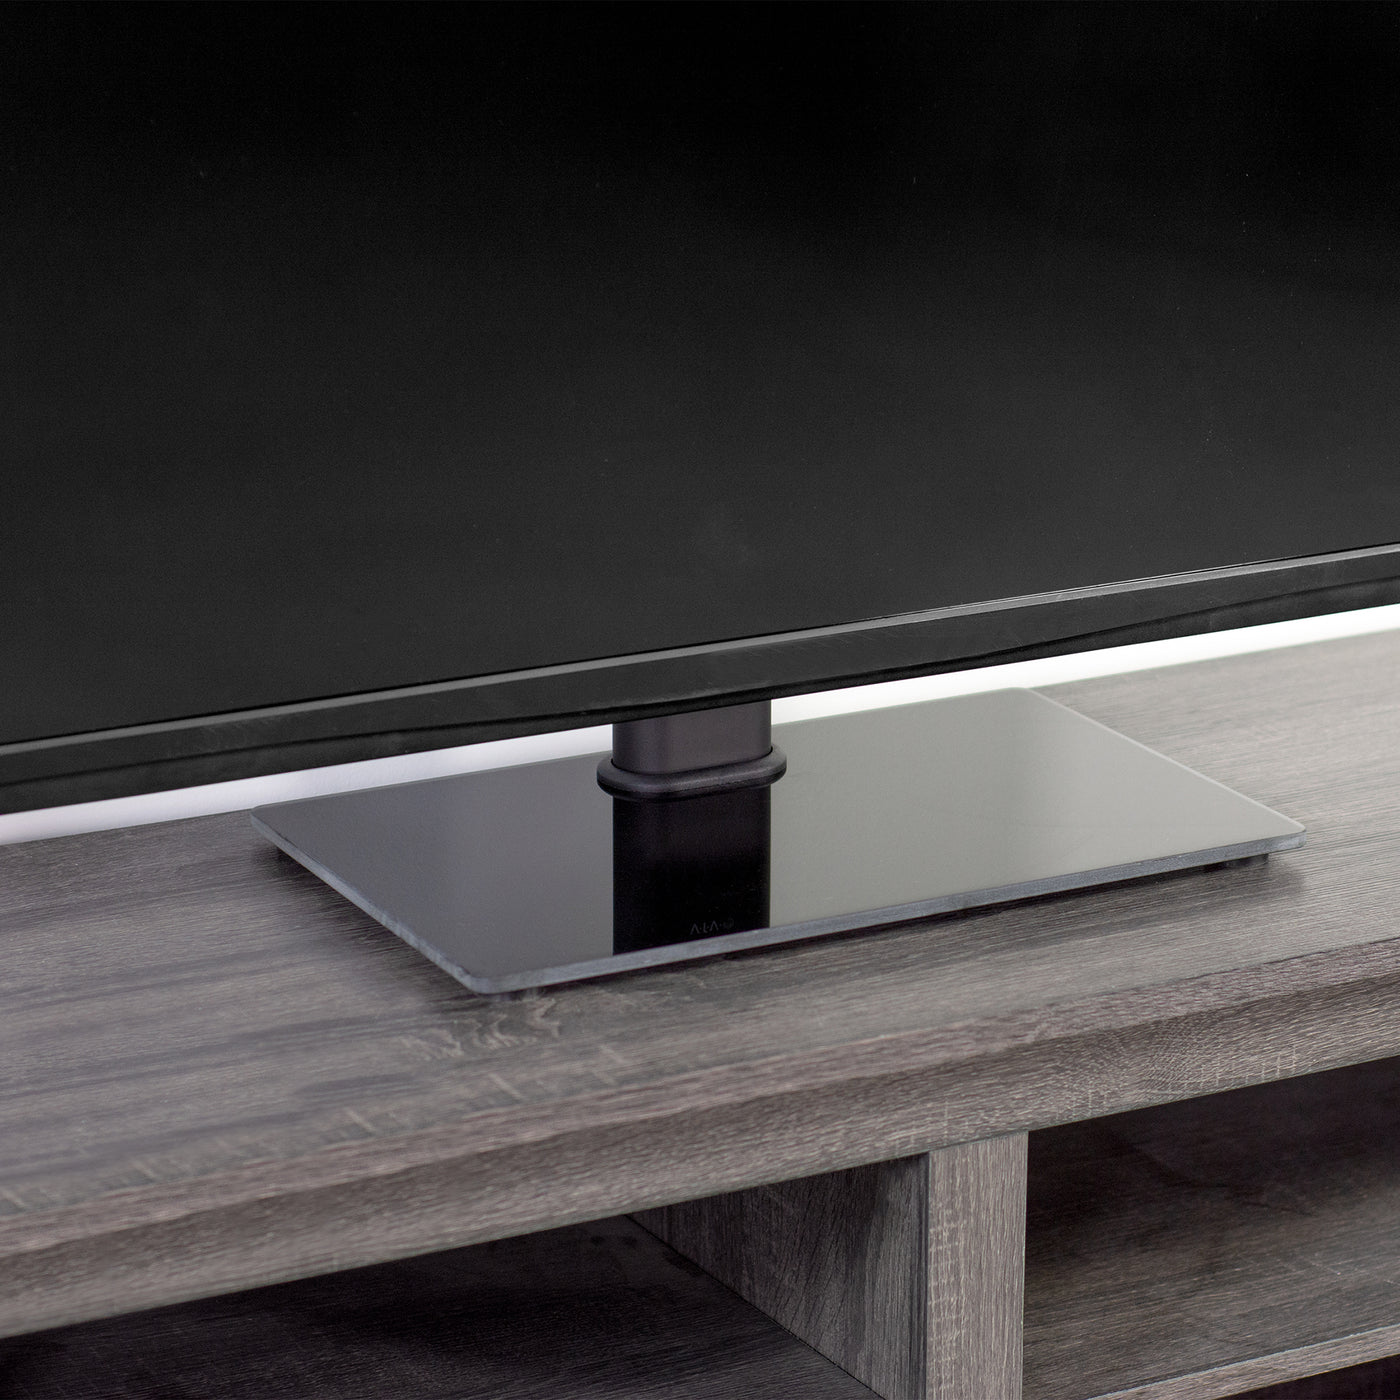 Heavy-duty tabletop TV stand with tempered glass base.